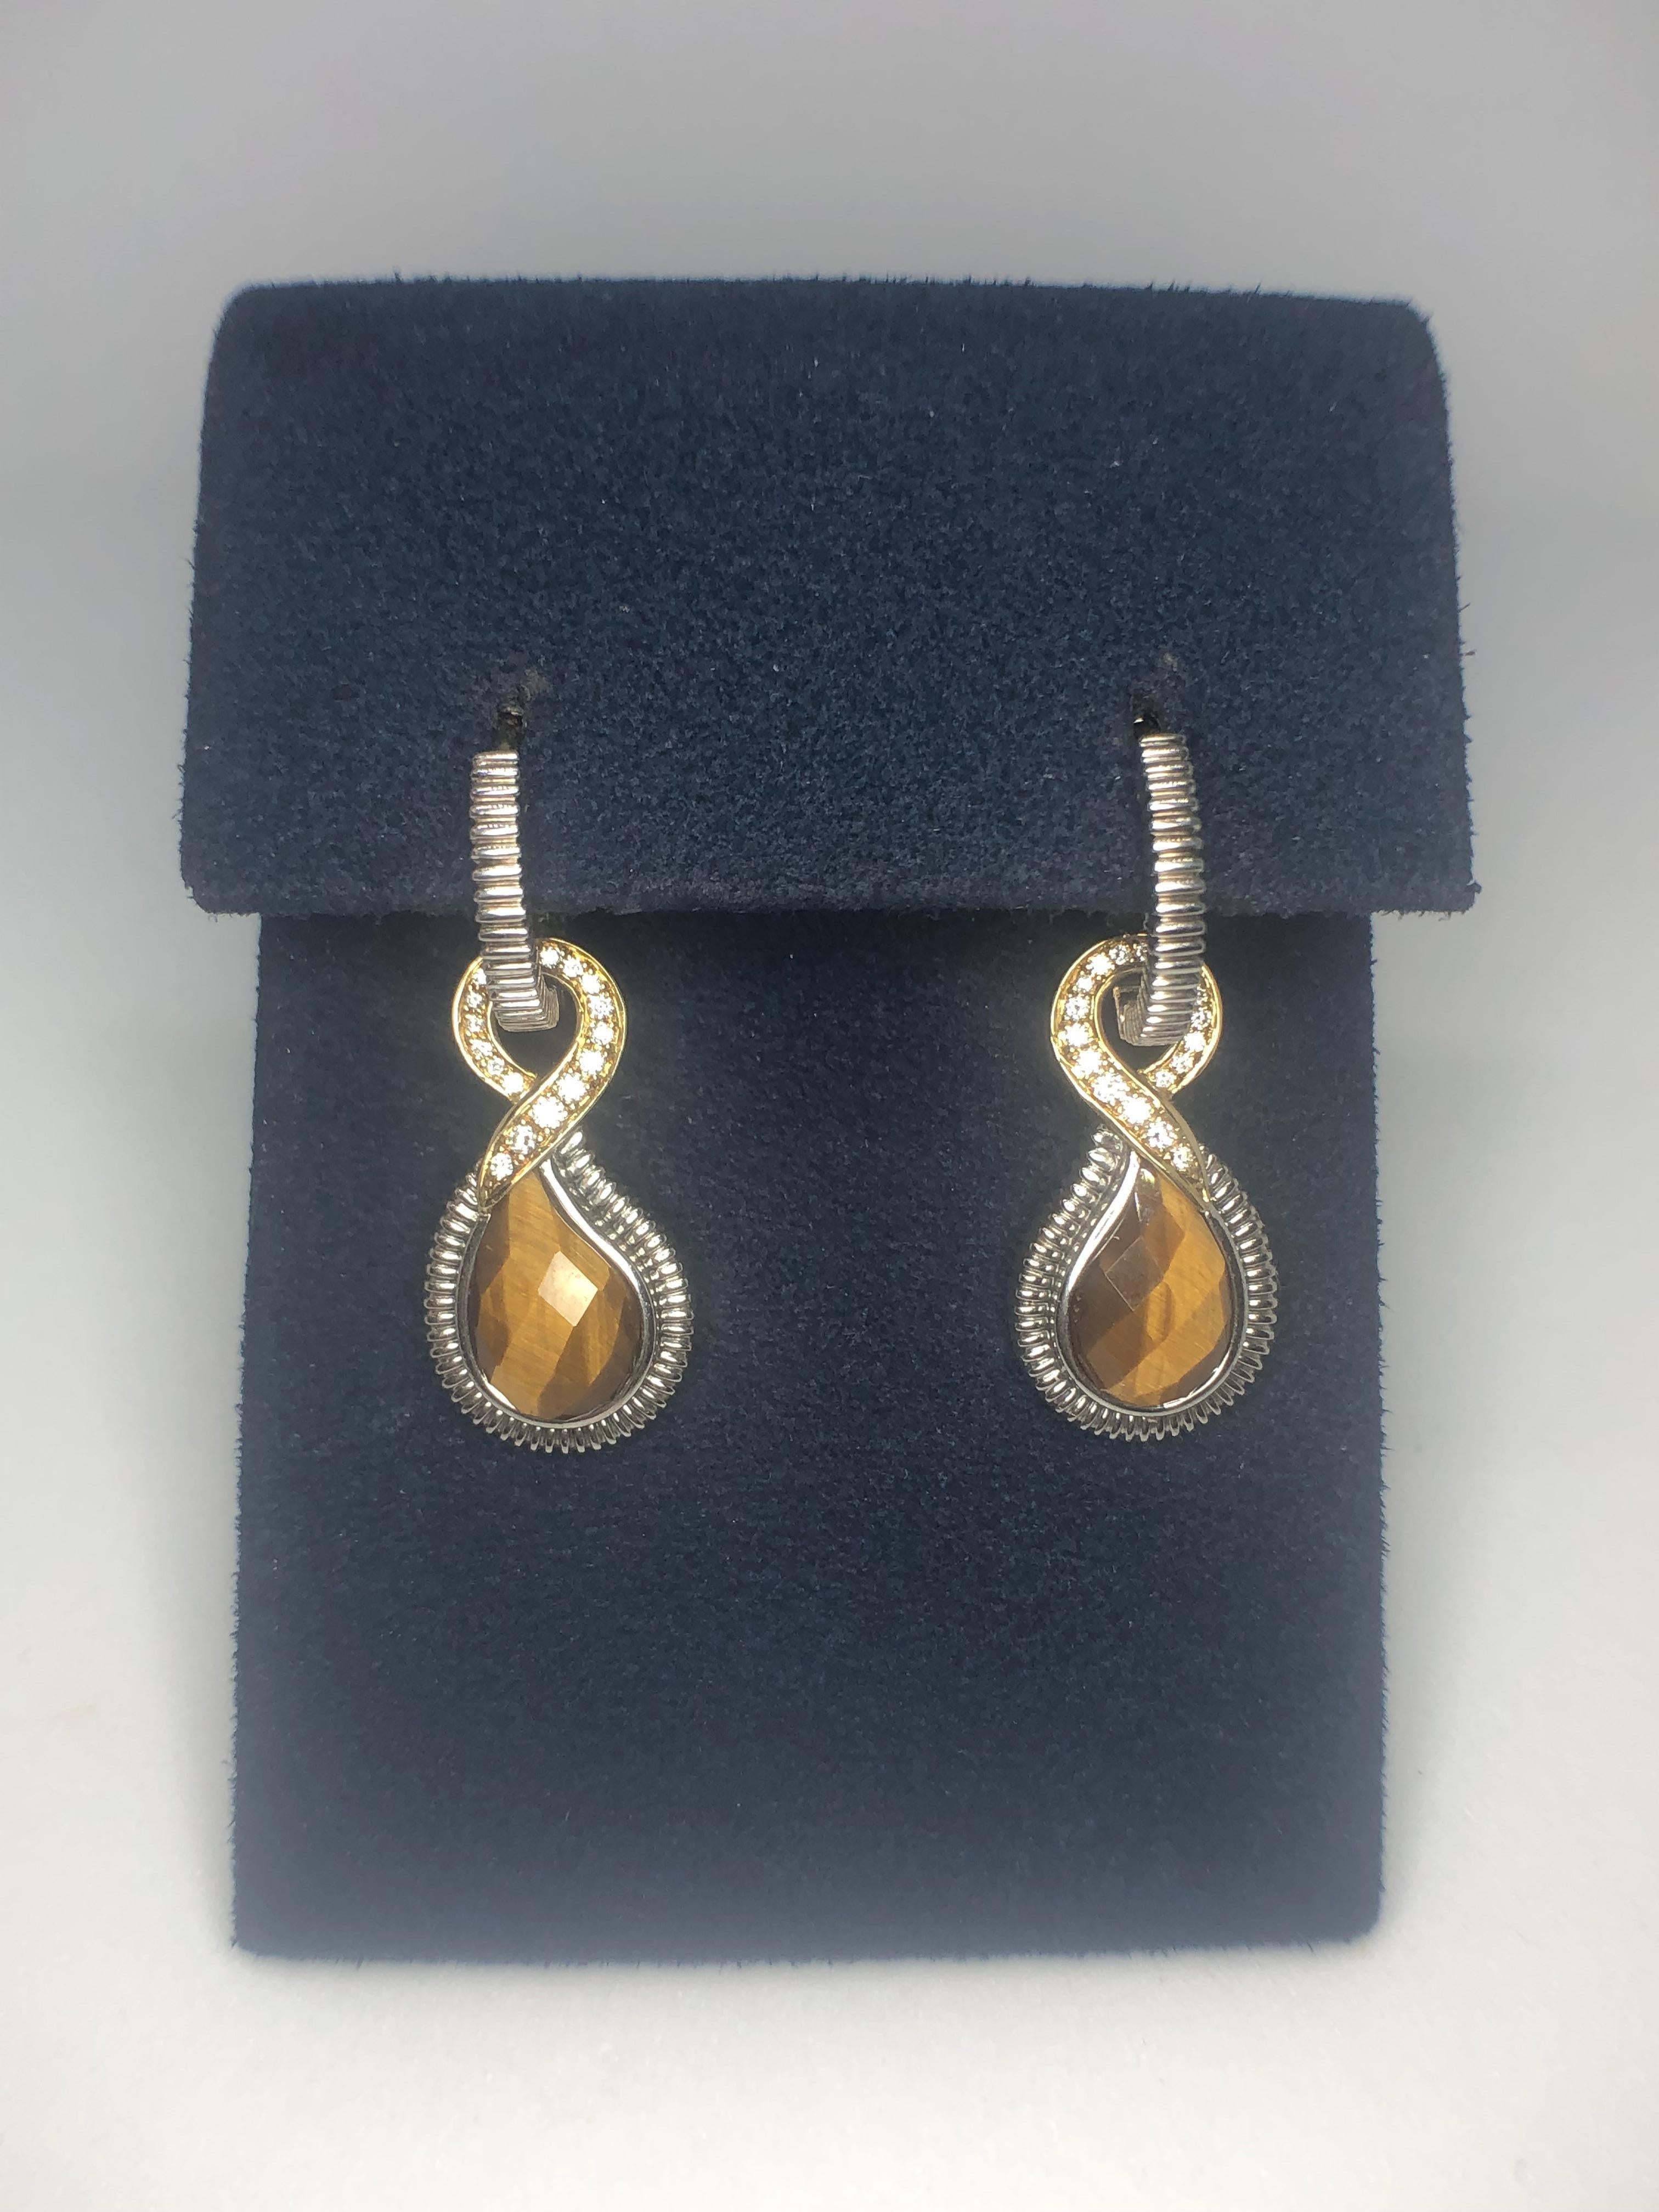 Tiger Eye and Diamond Earrings by Cordova For Sale 1